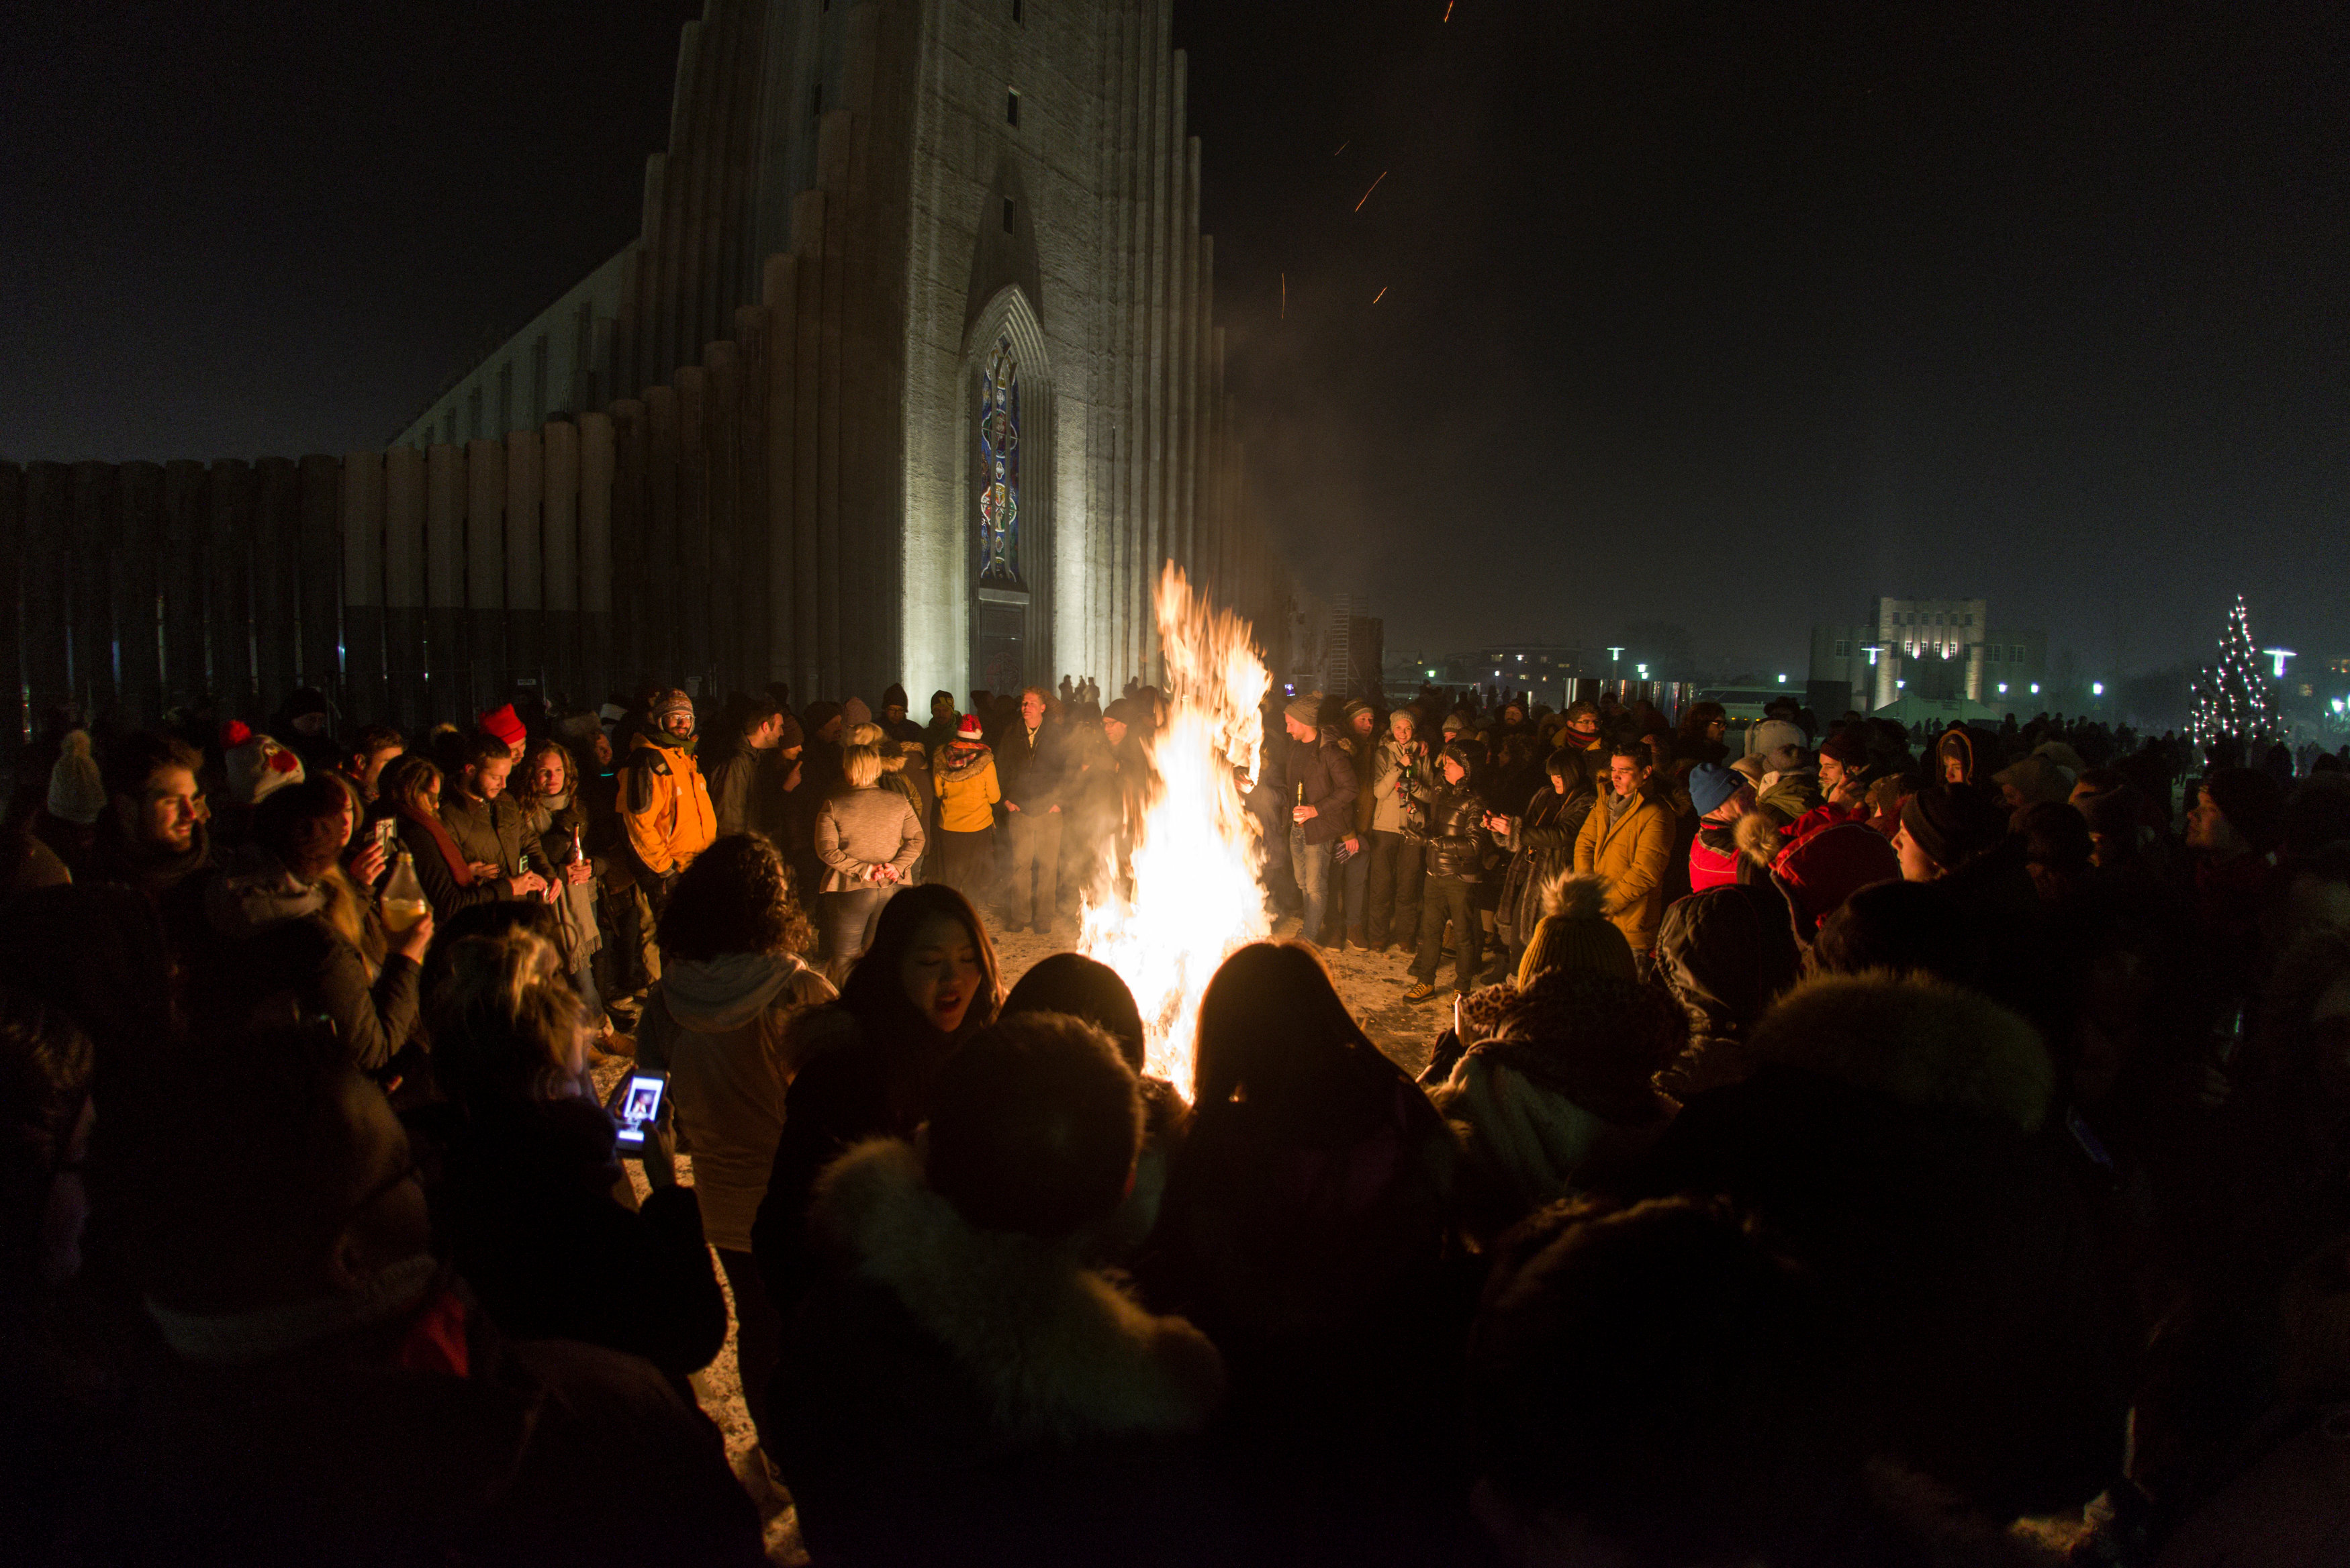 People gather at Hallgrims church to celebrate the New Year in Reykjavik, Iceland, January 1, 2017. (Geirix / Reuters)